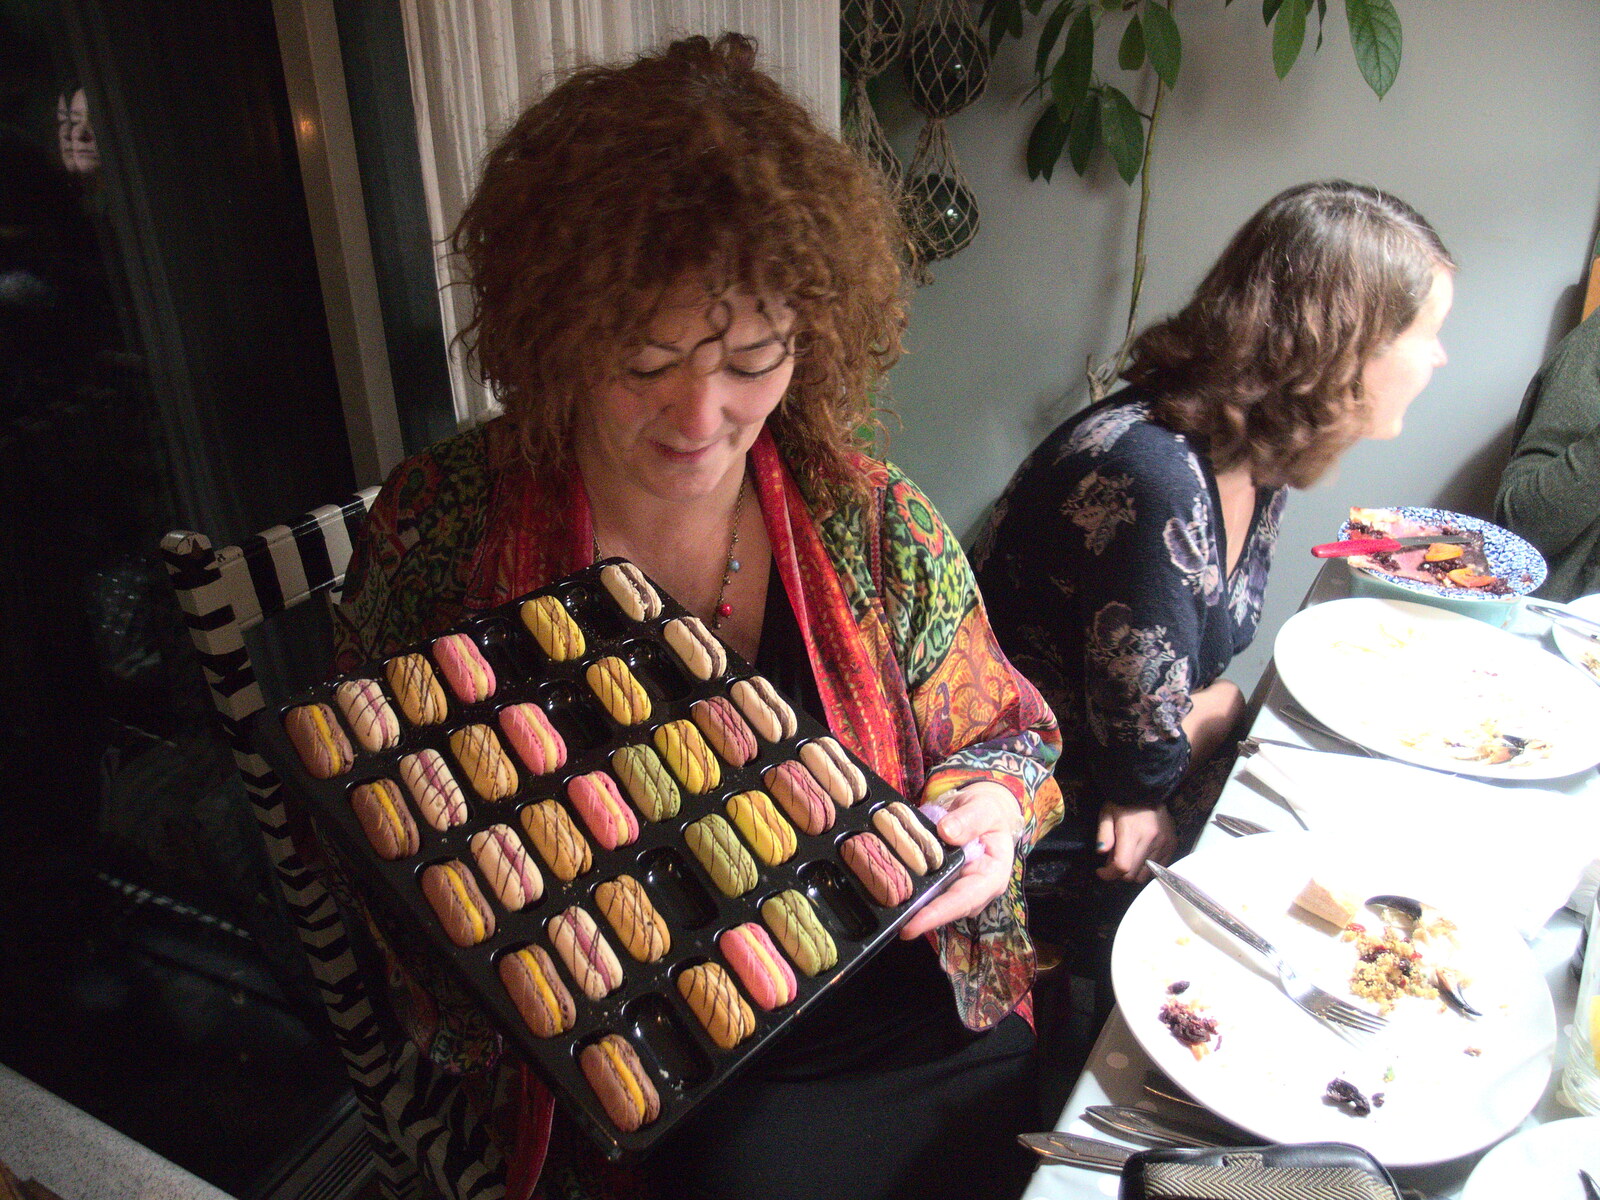 Caro gets some Macarons out from Christmas in Blackrock and St. Stephen's in Ballybrack, Dublin, Ireland - 25th December 2015